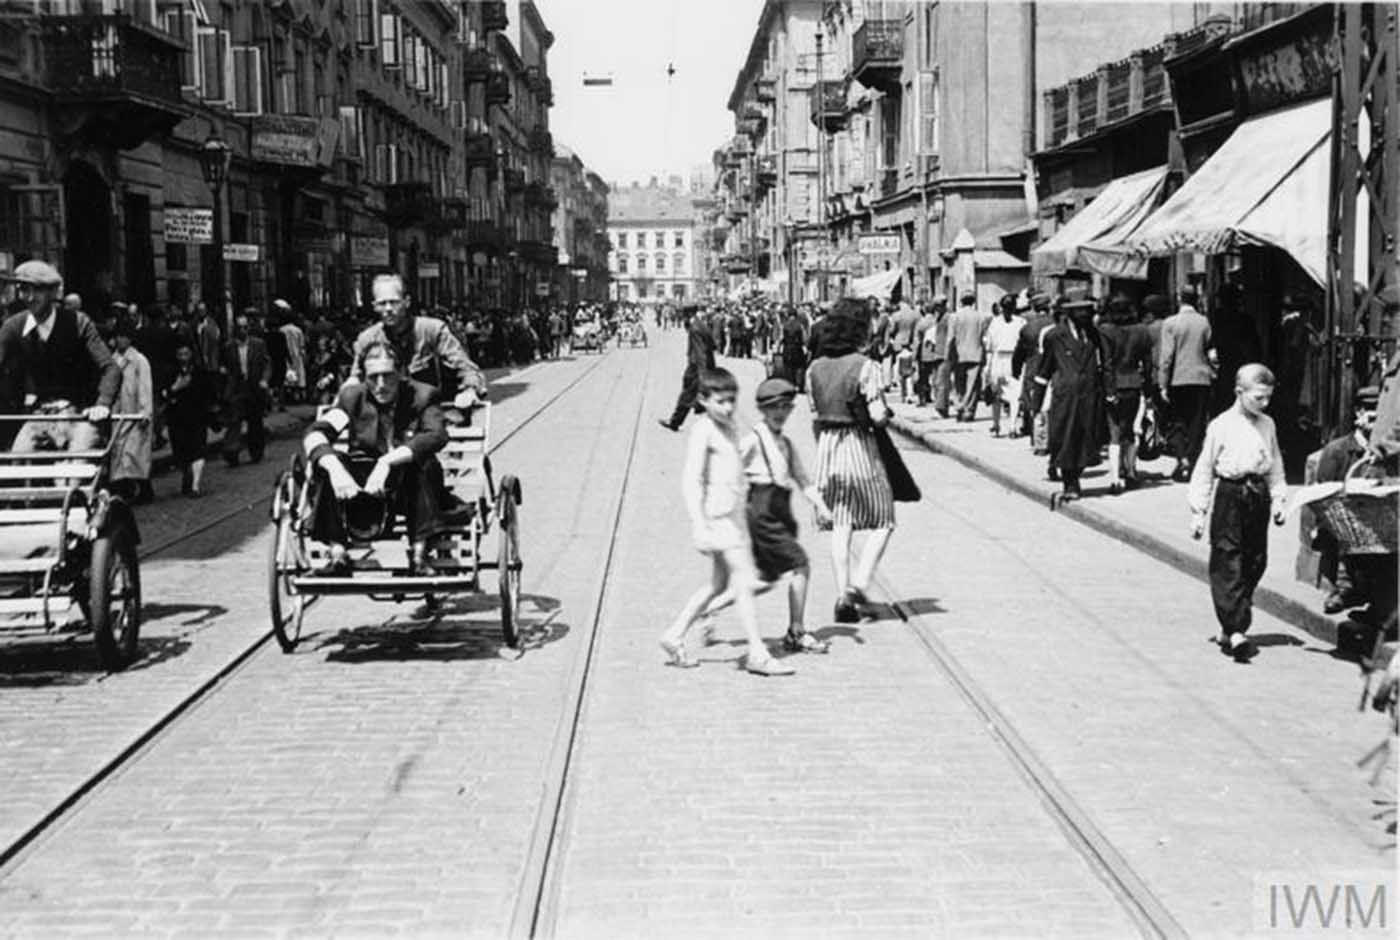 Crowds of pedestrians and street rickshaws in busy Karmelicka Street in the ghetto.